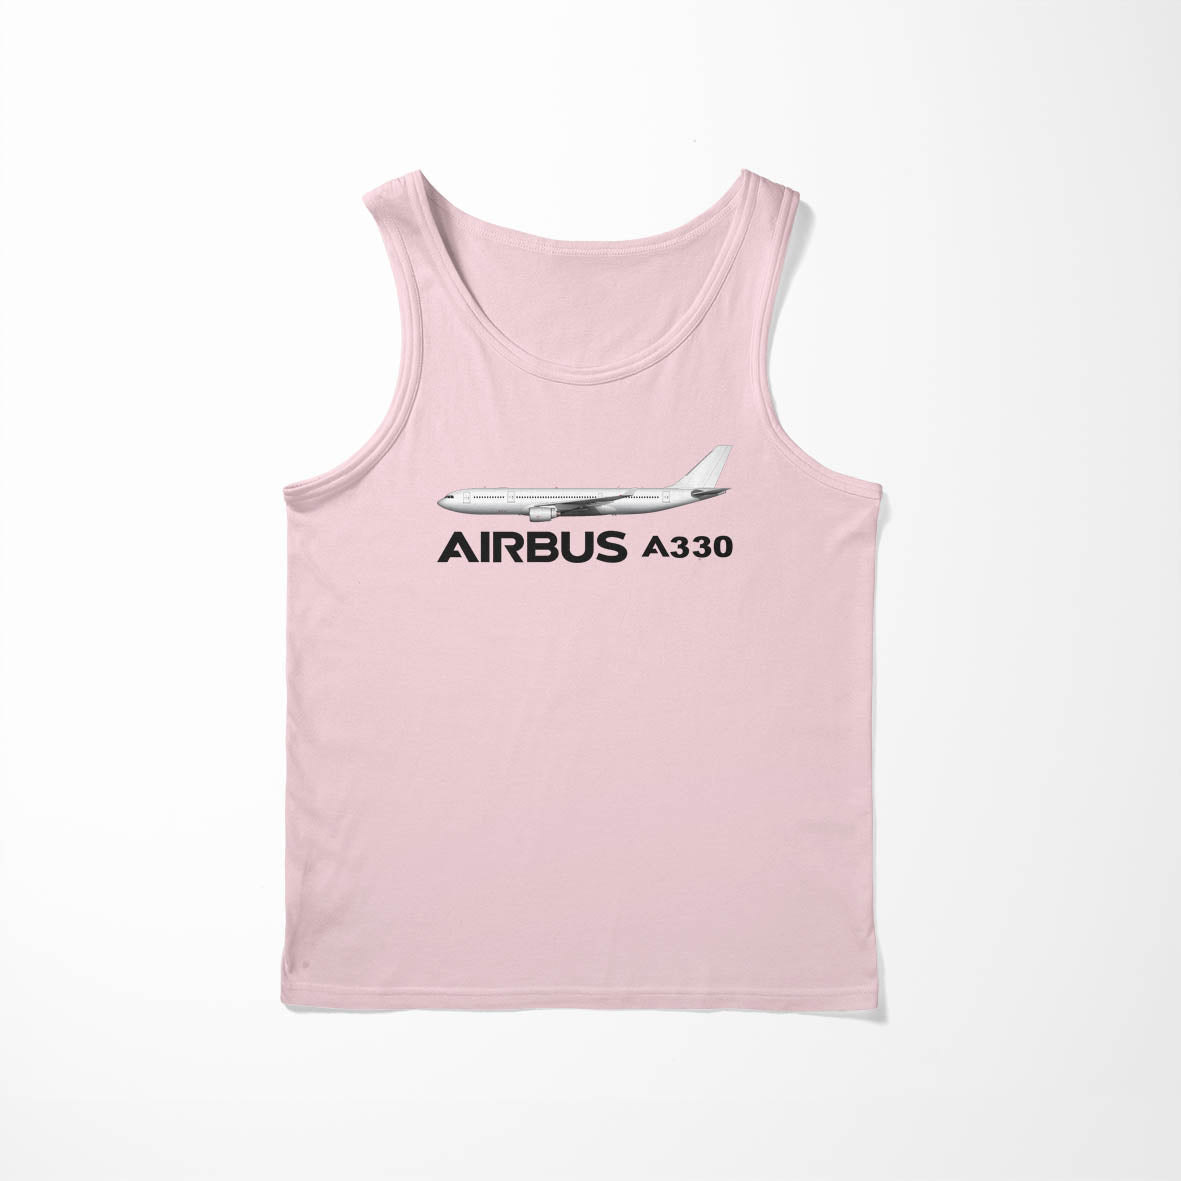 The Airbus A330 Designed Tank Tops